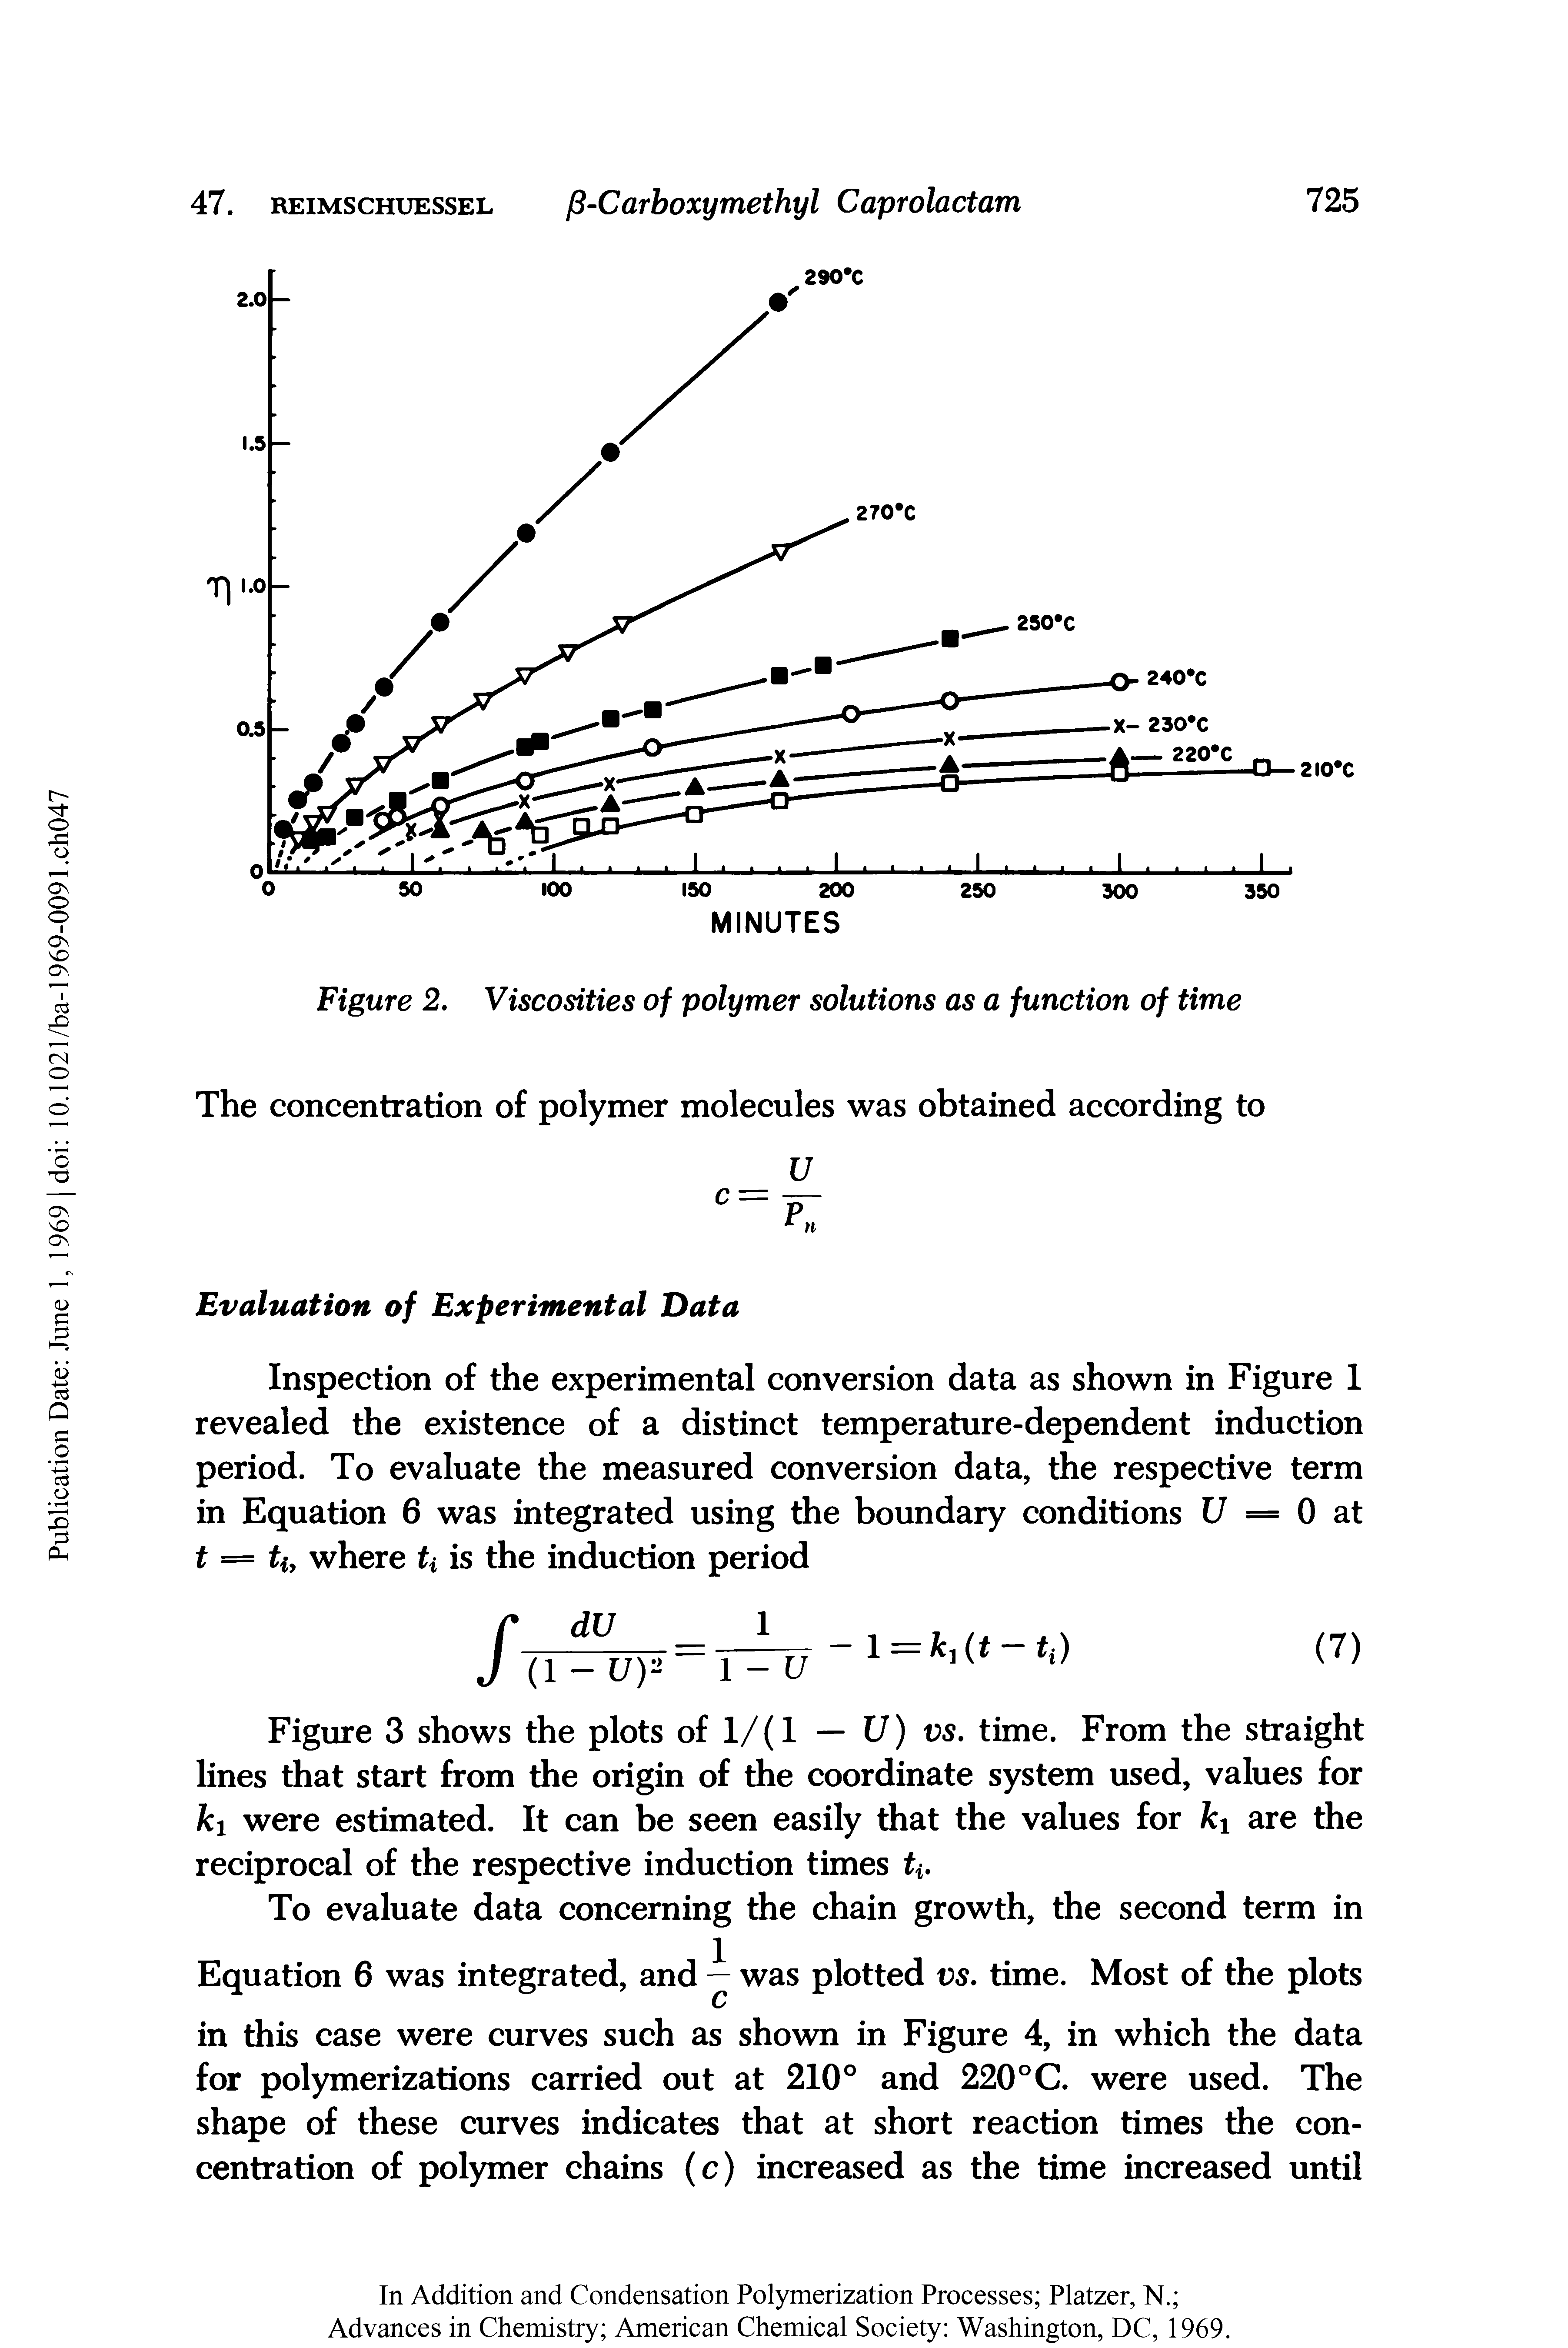 Figure 2. Viscosities of polymer solutions as a function of time...